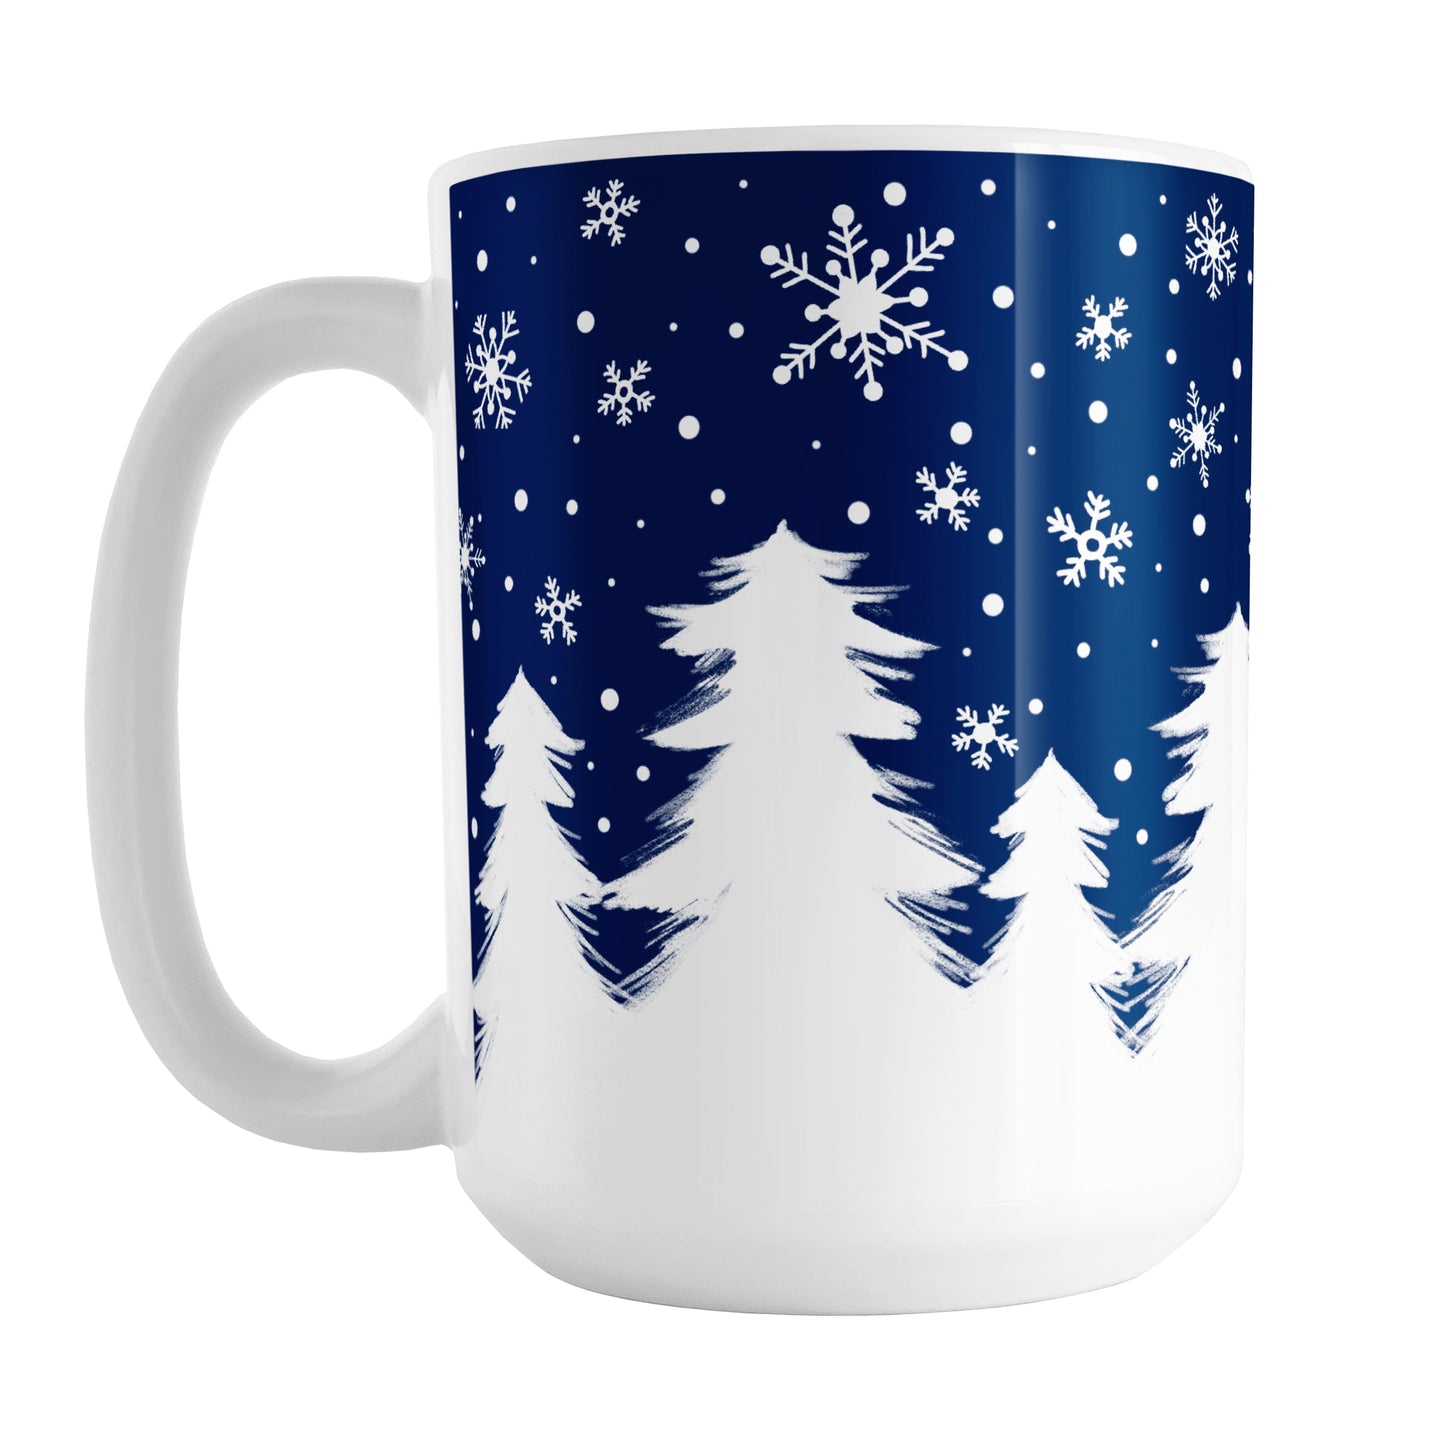 Winter Night Snow Mug (15oz) at Amy's Coffee Mugs. A ceramic coffee mug designed with an illustrated winter night snow treeline. The design features a navy blue sky is filled with white snowflakes over a row of white pine trees along the bottom.